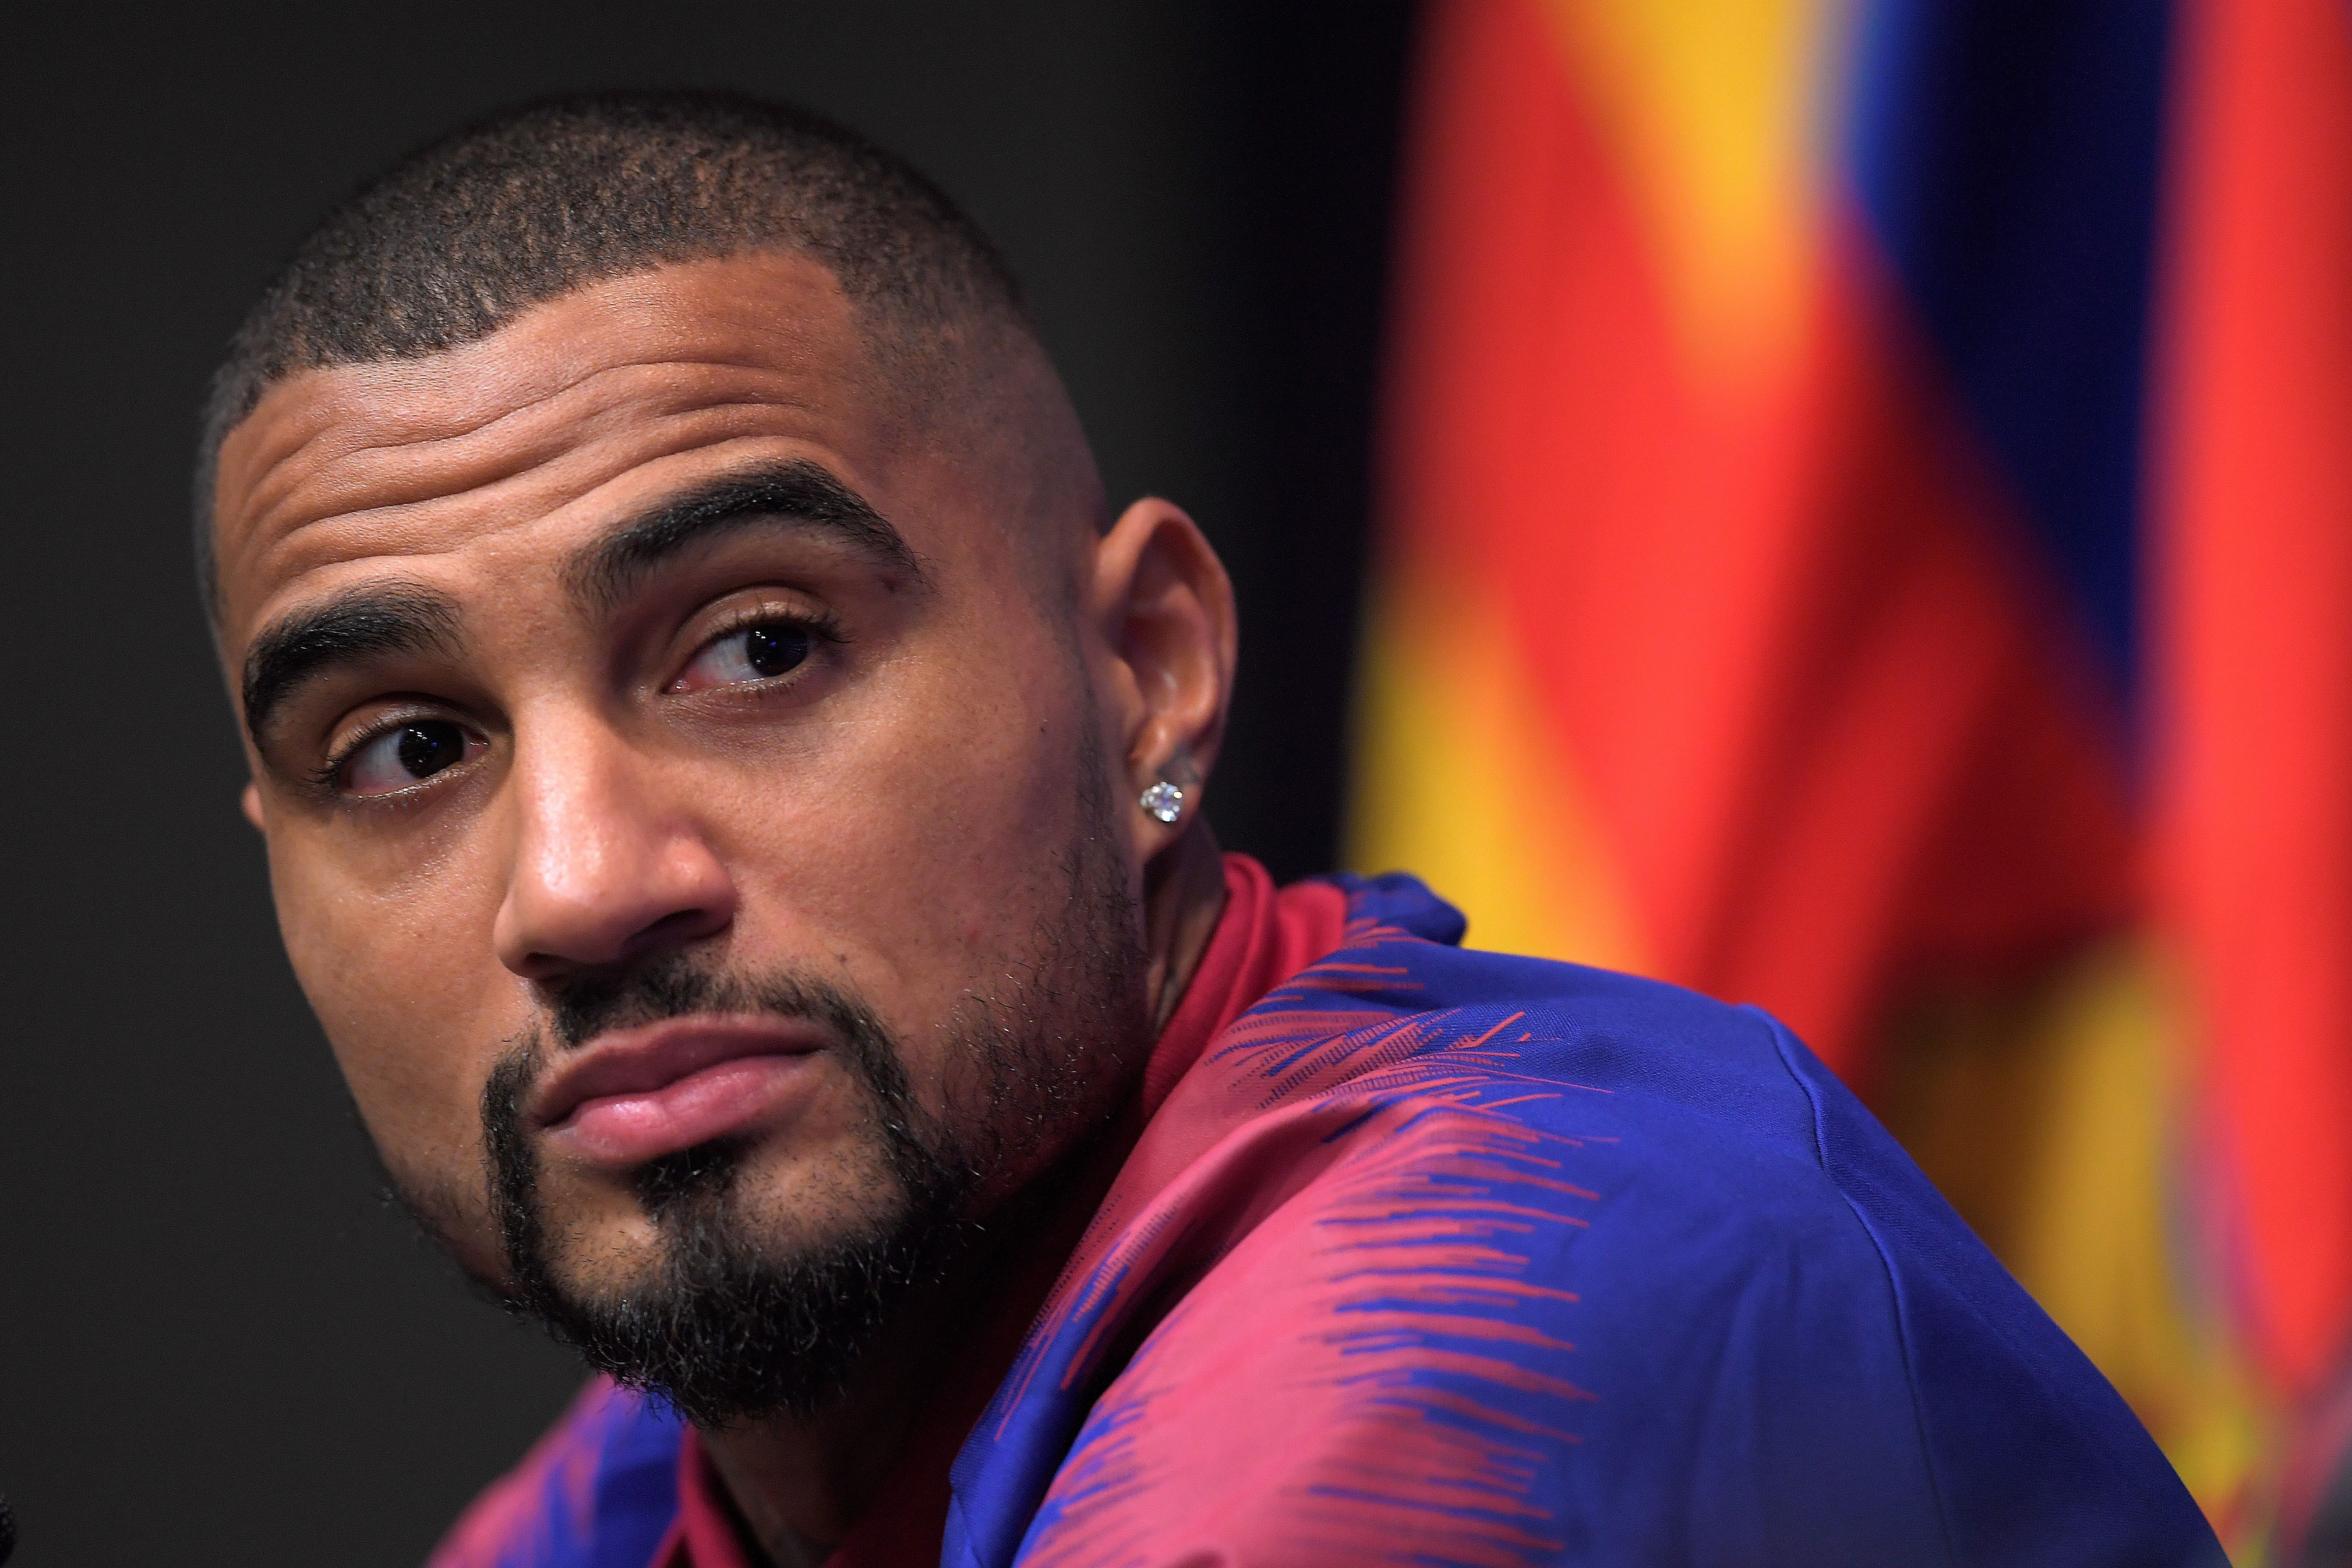 Barcelona's new Ghanaian forward Kevin-Prince Boateng holds a press conference during his official presentation at the Camp Nou stadium in Barcelona on January 22, 2019. - Boateng has vowed to make the most of his shock arrival at Barcelona, after a loan move for the journeyman from Italian side Sassuolo was sealed. (Photo by LLUIS GENE / AFP)        (Photo credit should read LLUIS GENE/AFP/Getty Images)